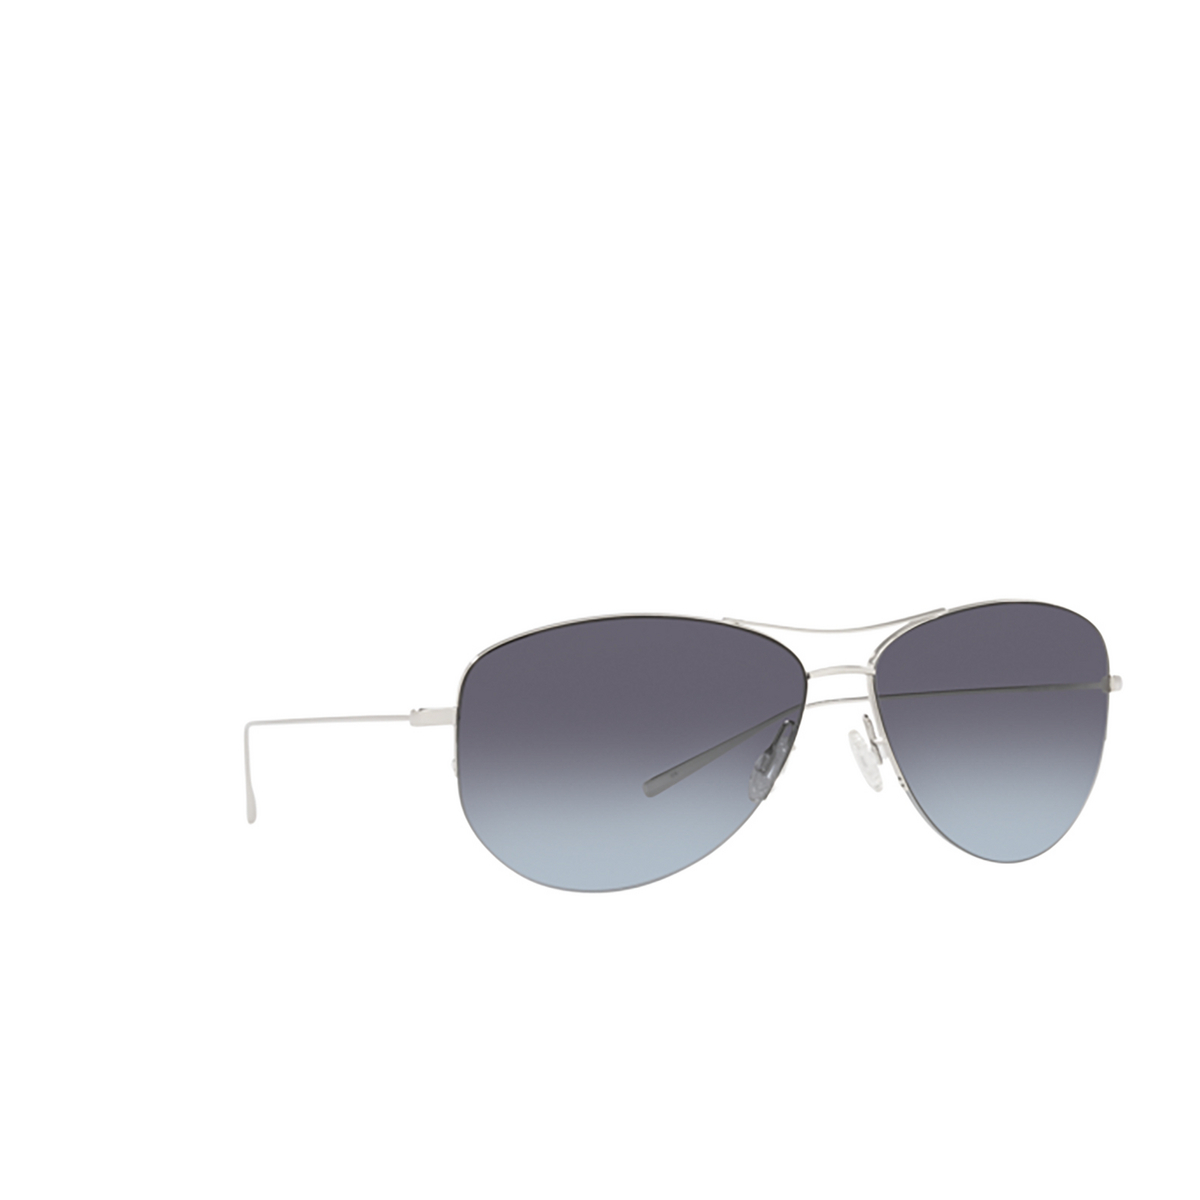 Oliver Peoples STRUMMER Sunglasses S Silver - three-quarters view